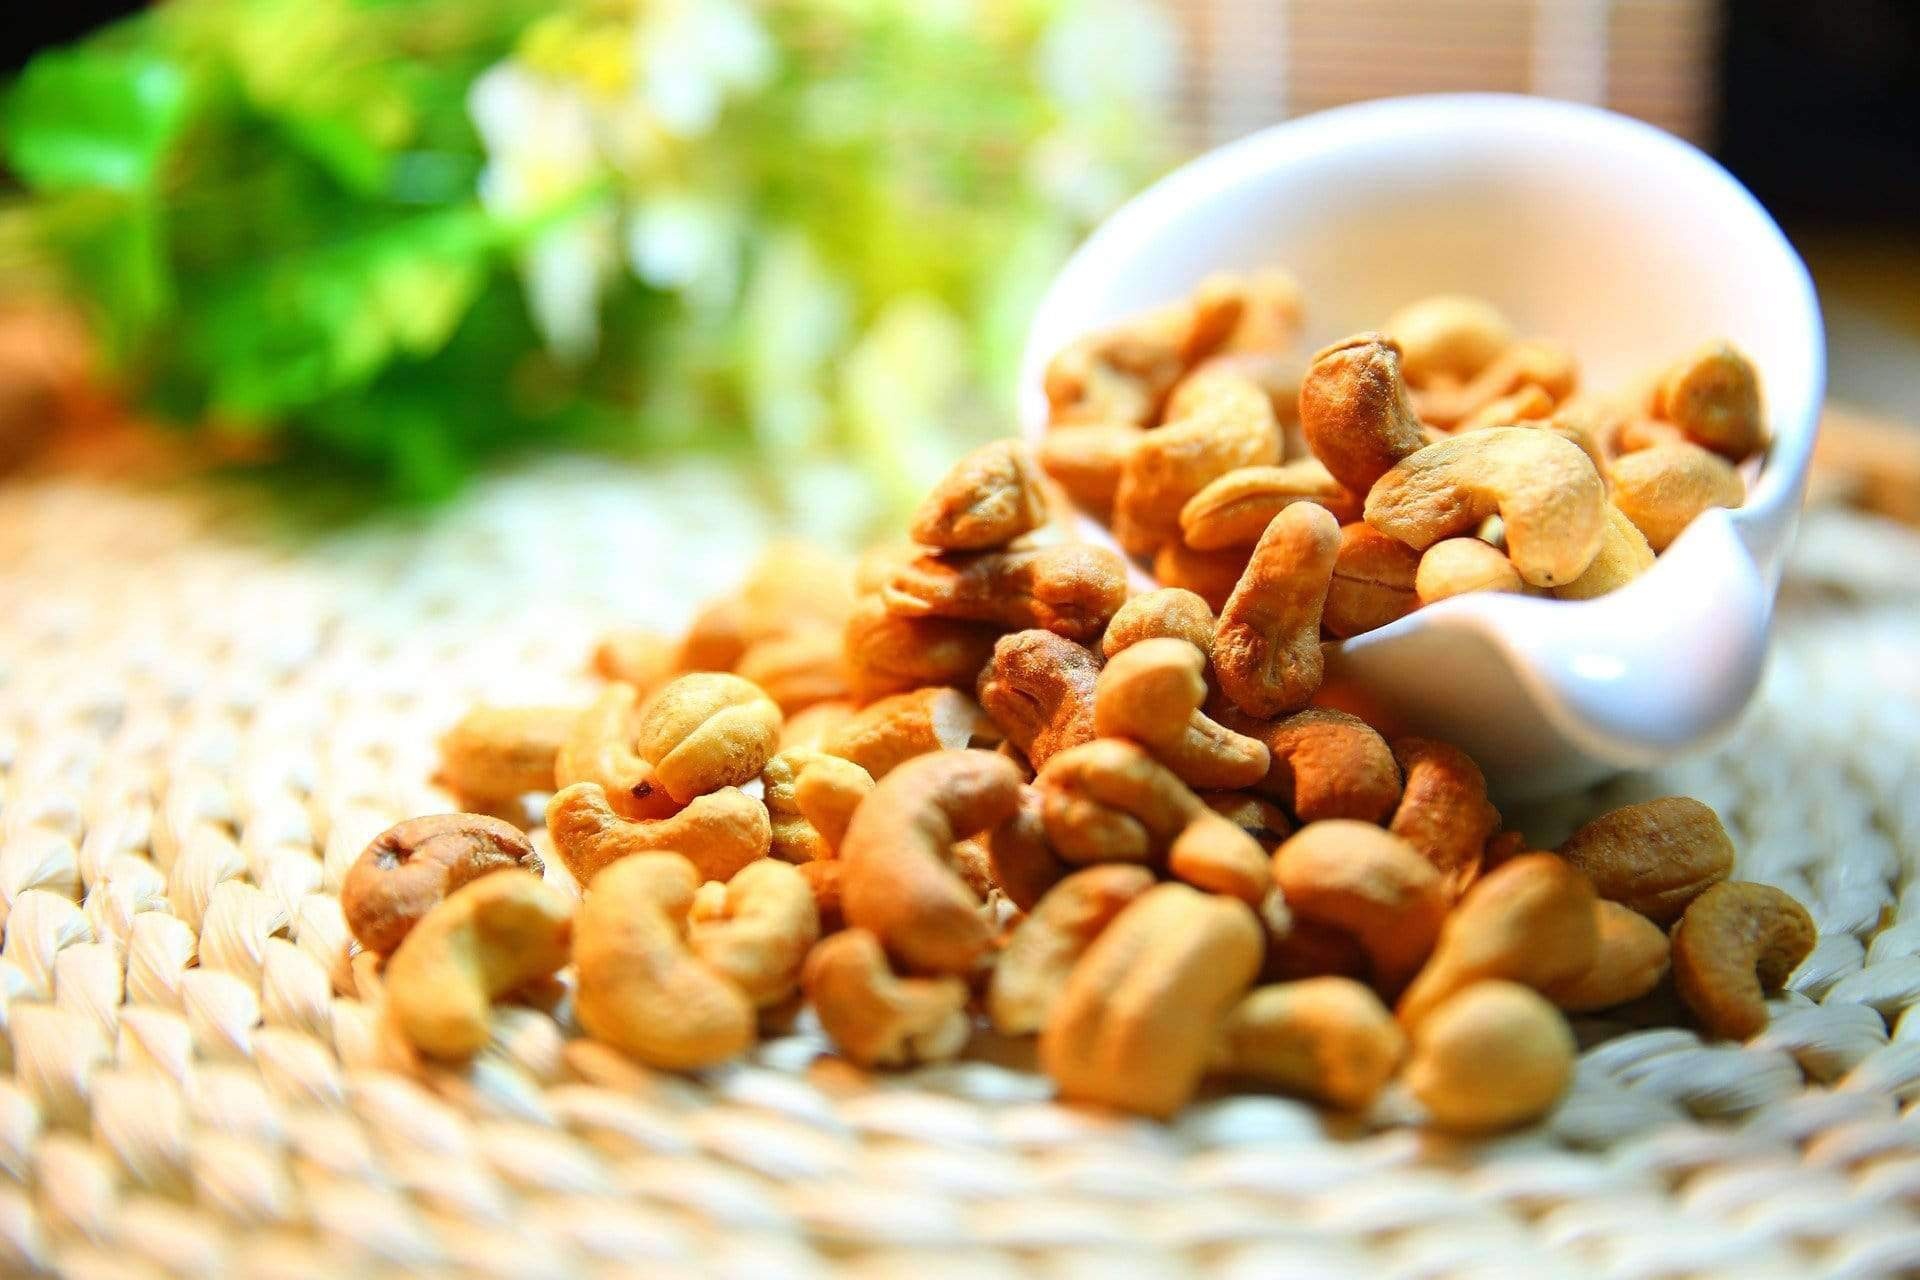 Cashew Nuts: A kidney-shaped seed sourced from the tropical tree, Cultivated in warm climates. 1920x1280 HD Wallpaper.